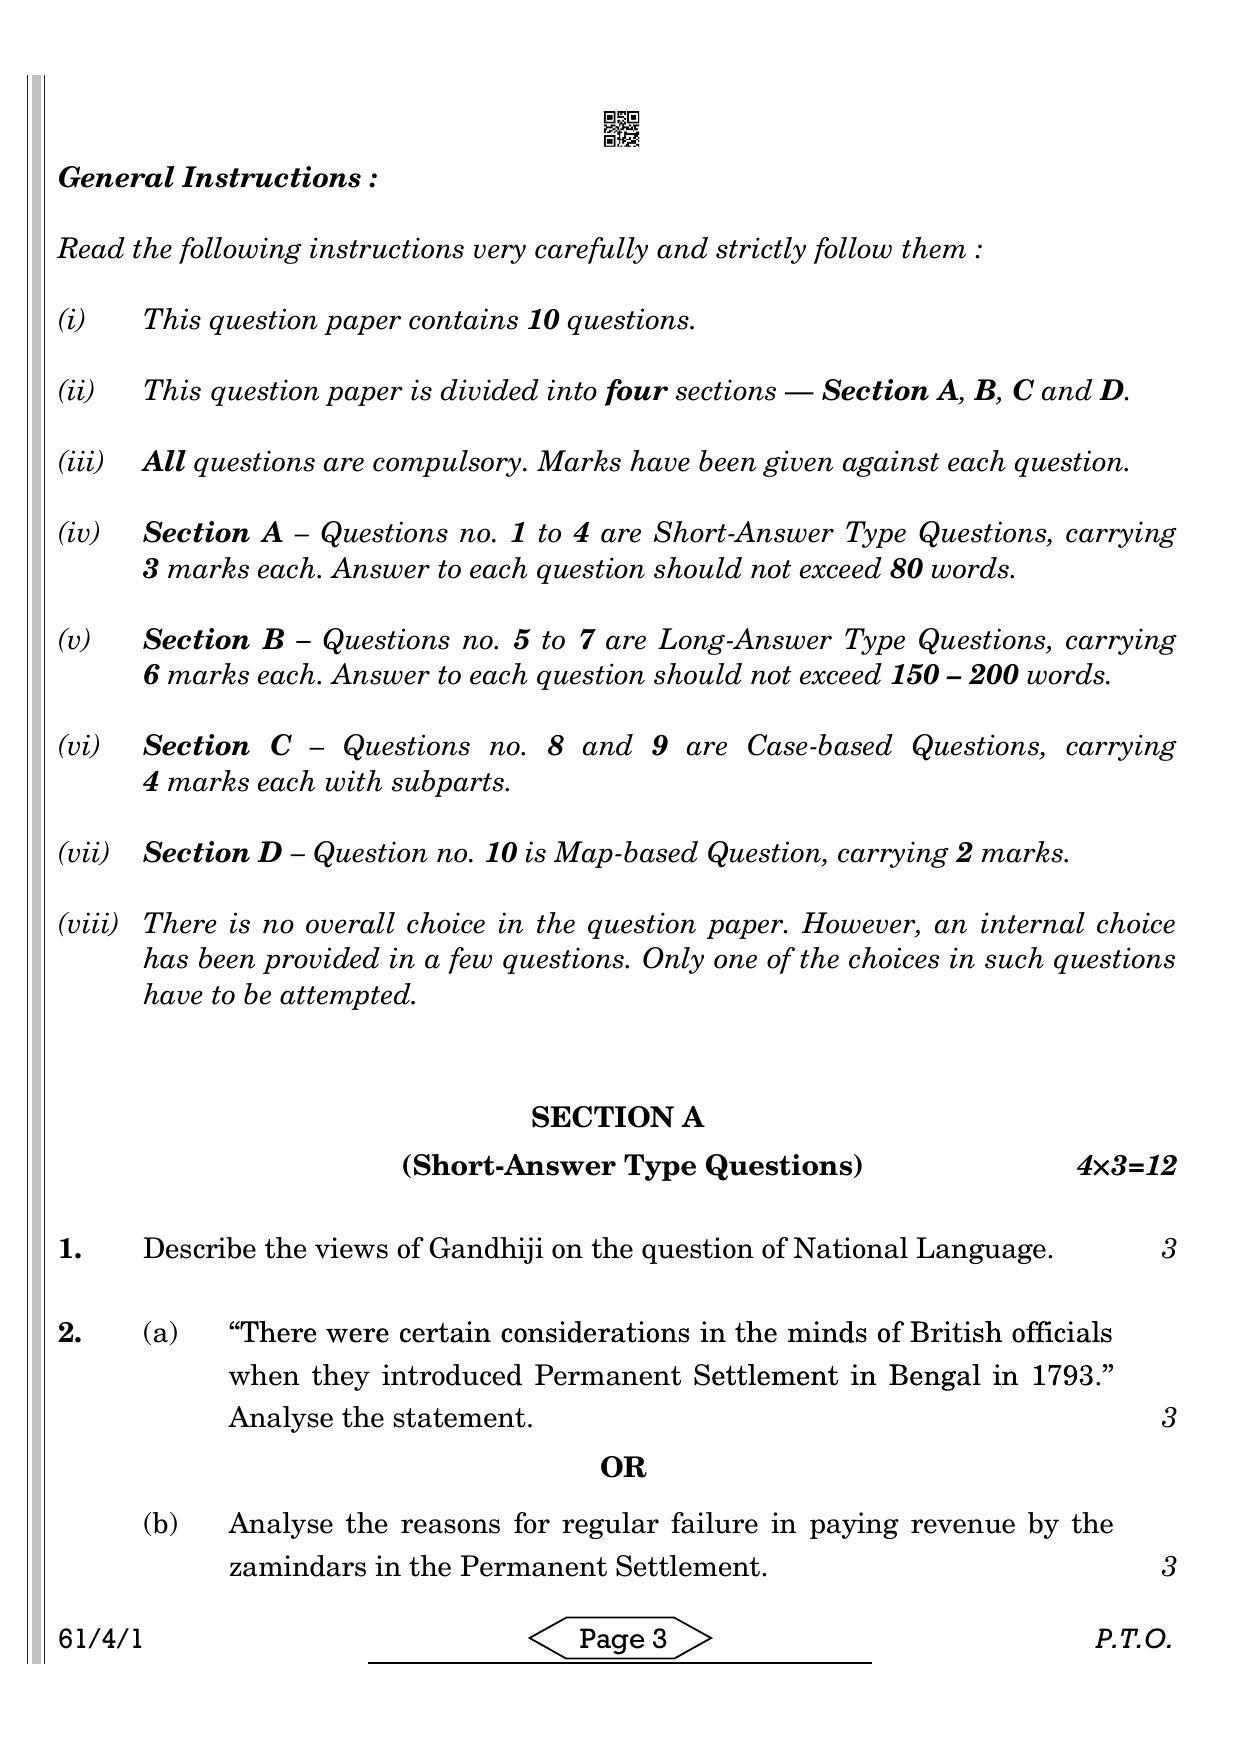 CBSE Class 12 61-4-1 History 2022 Question Paper - Page 3